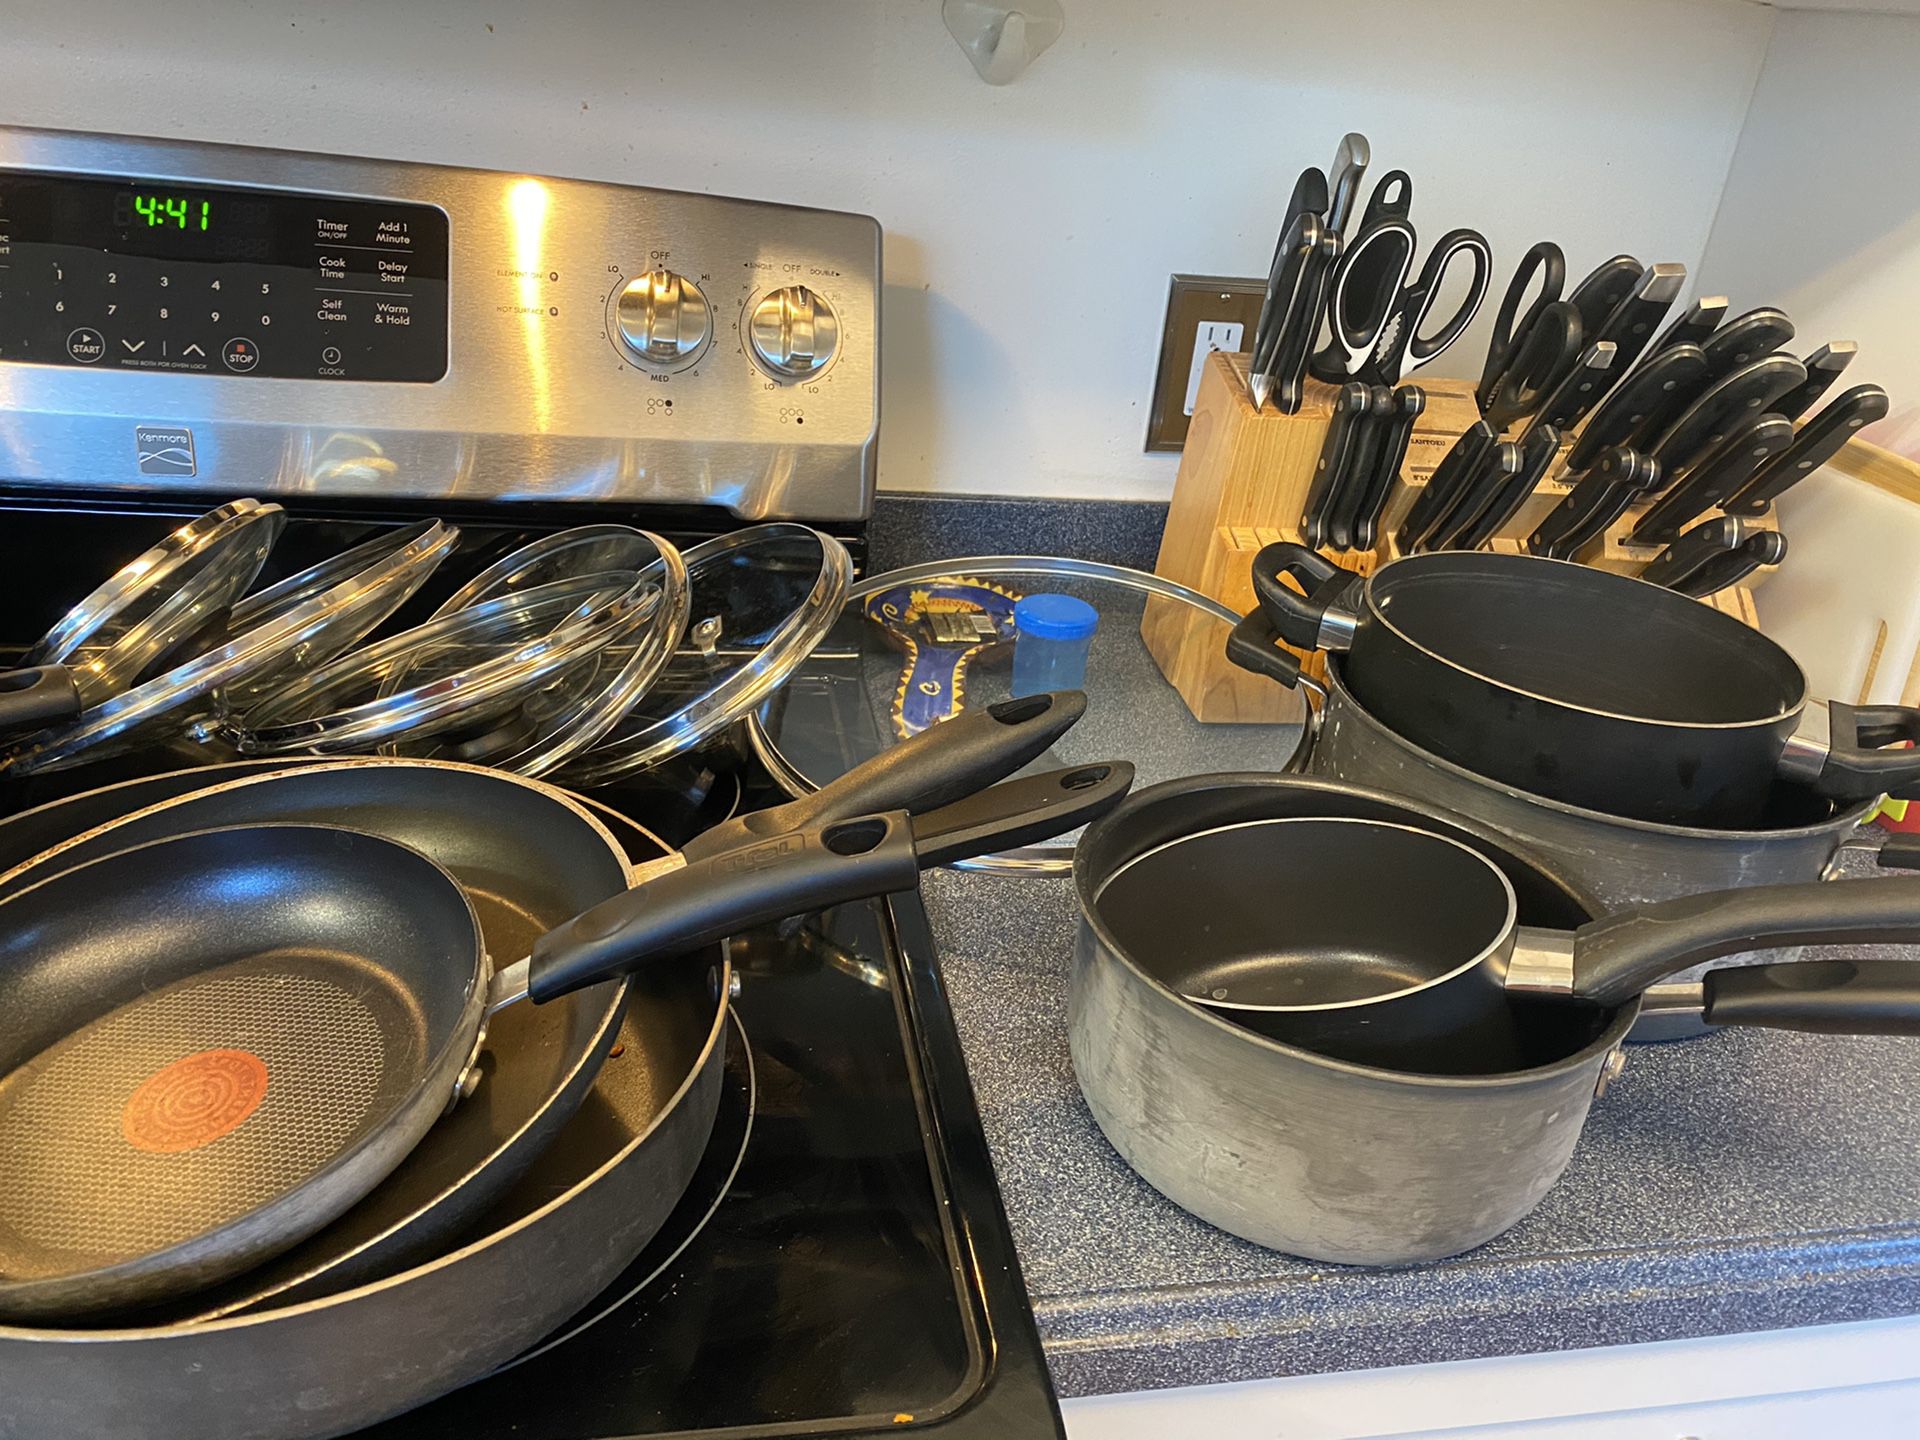 2 sets of kitchen cookware